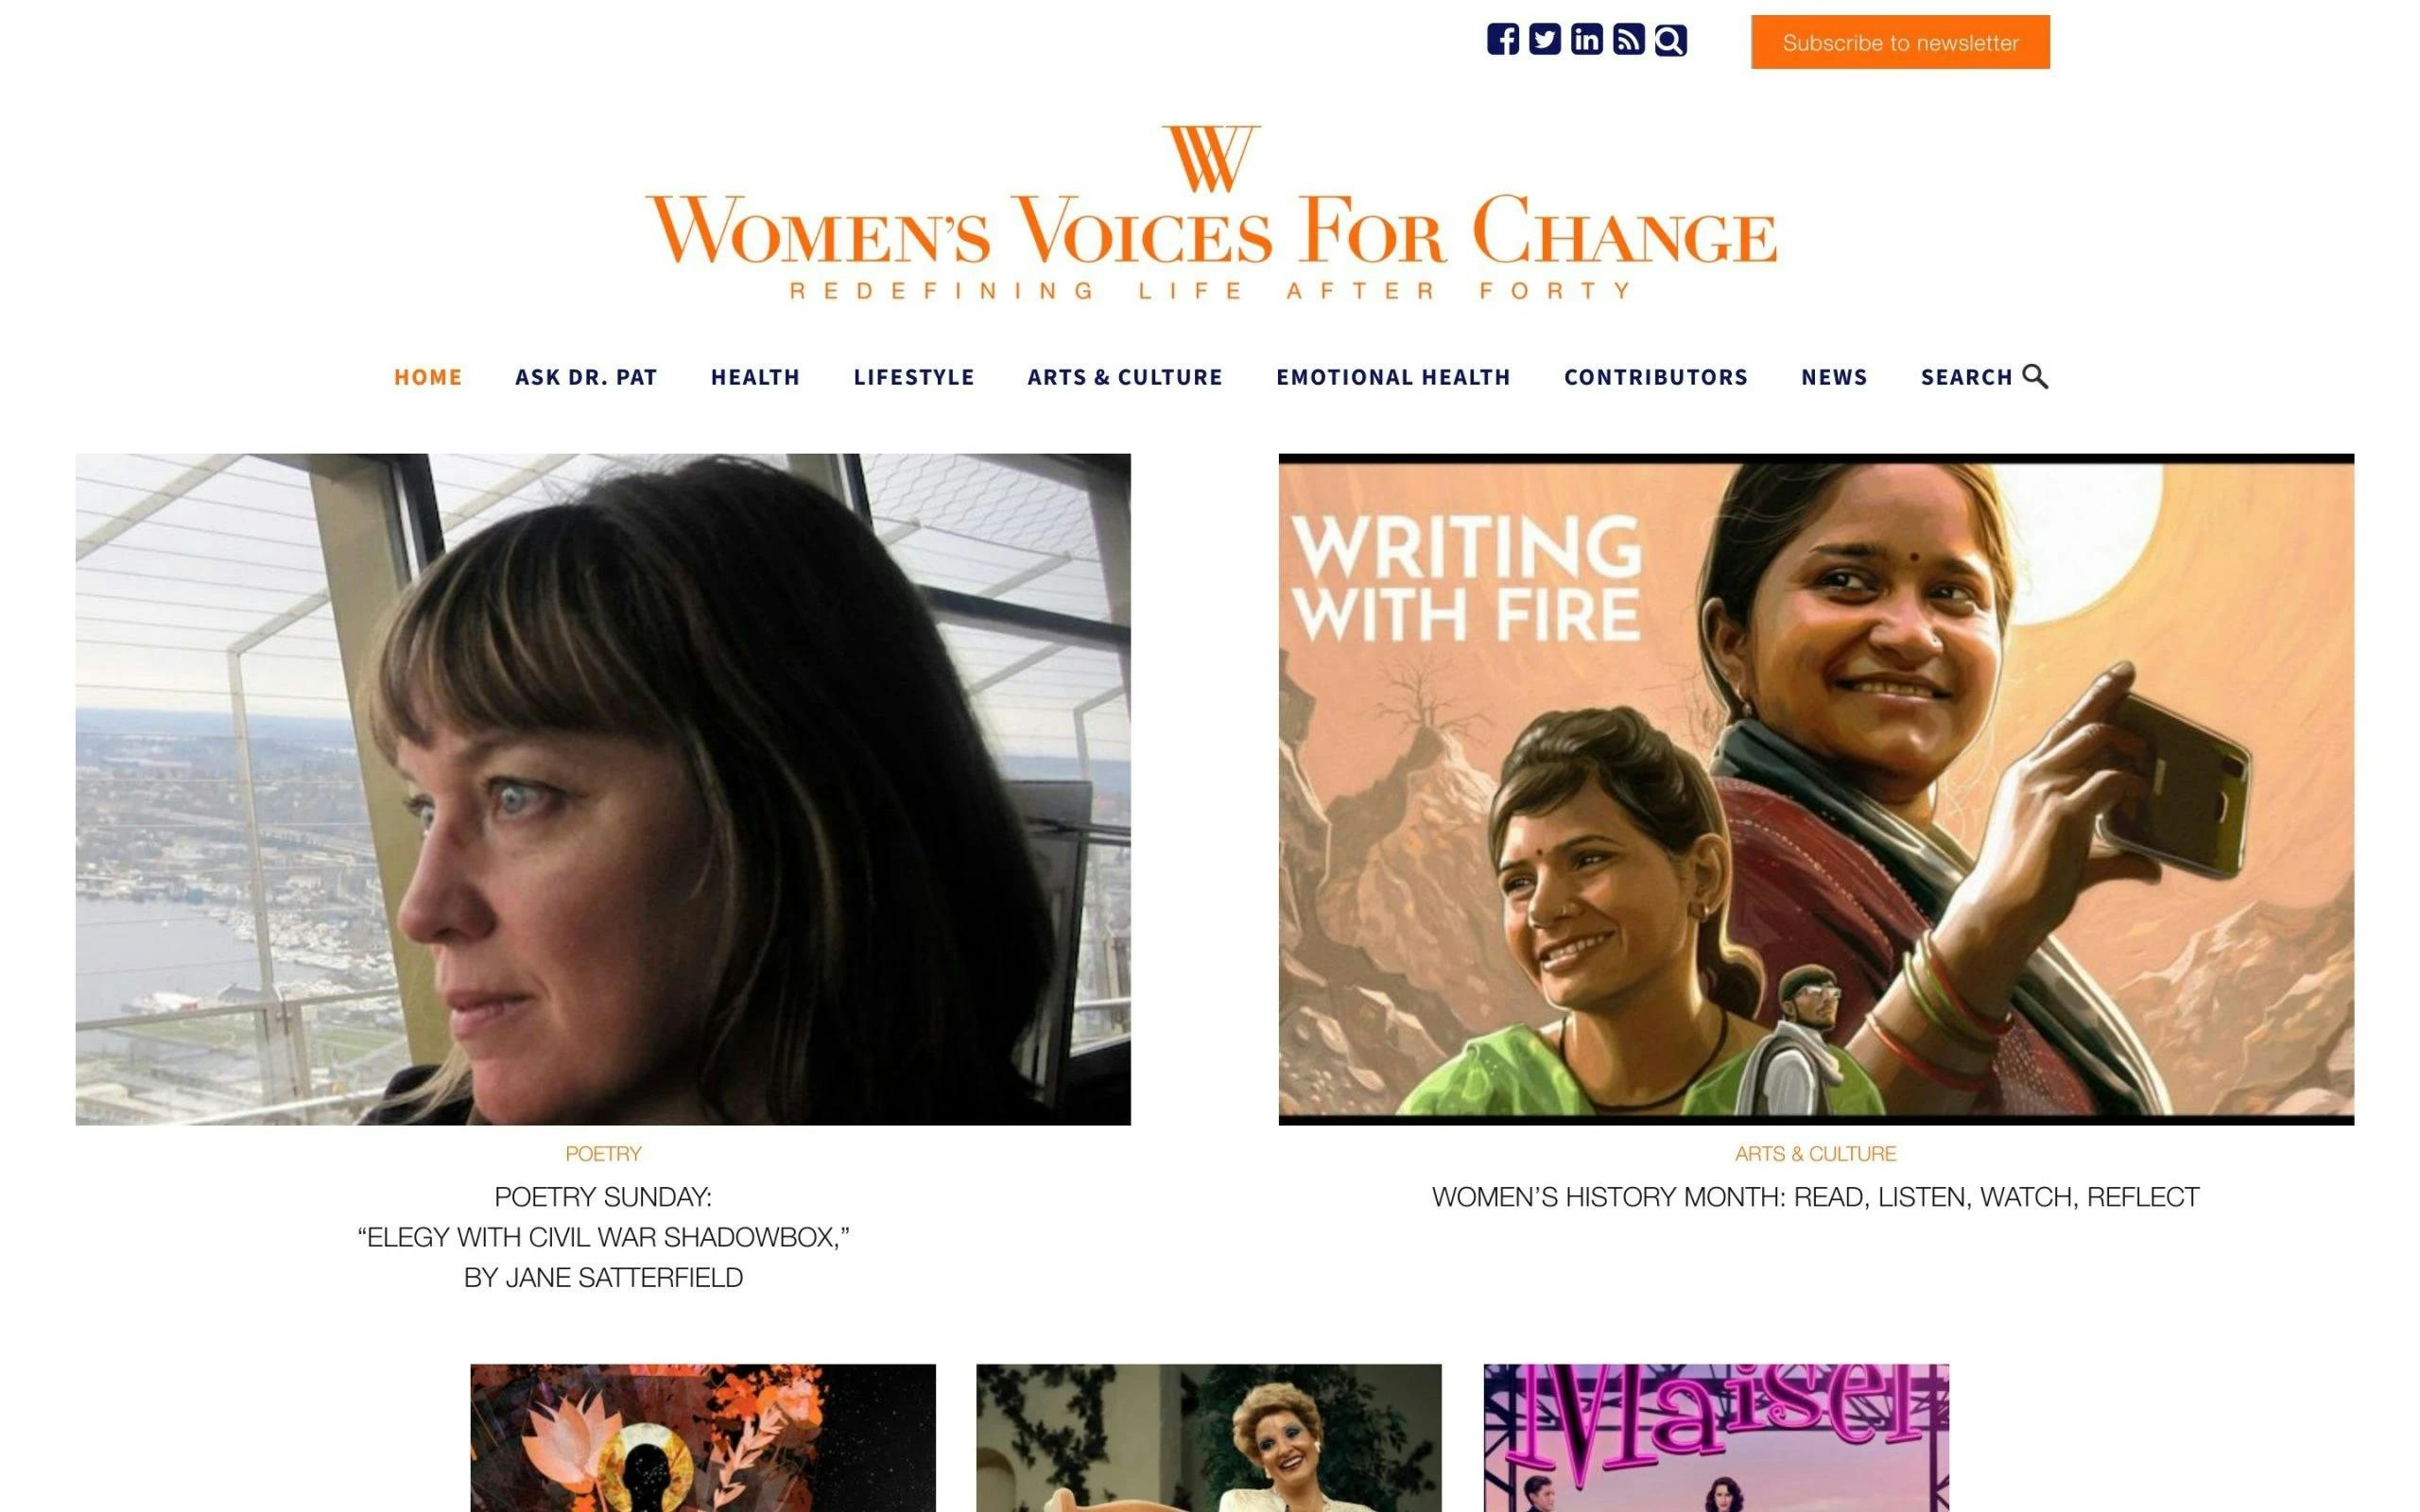 Women’s Voices for Change blog for women